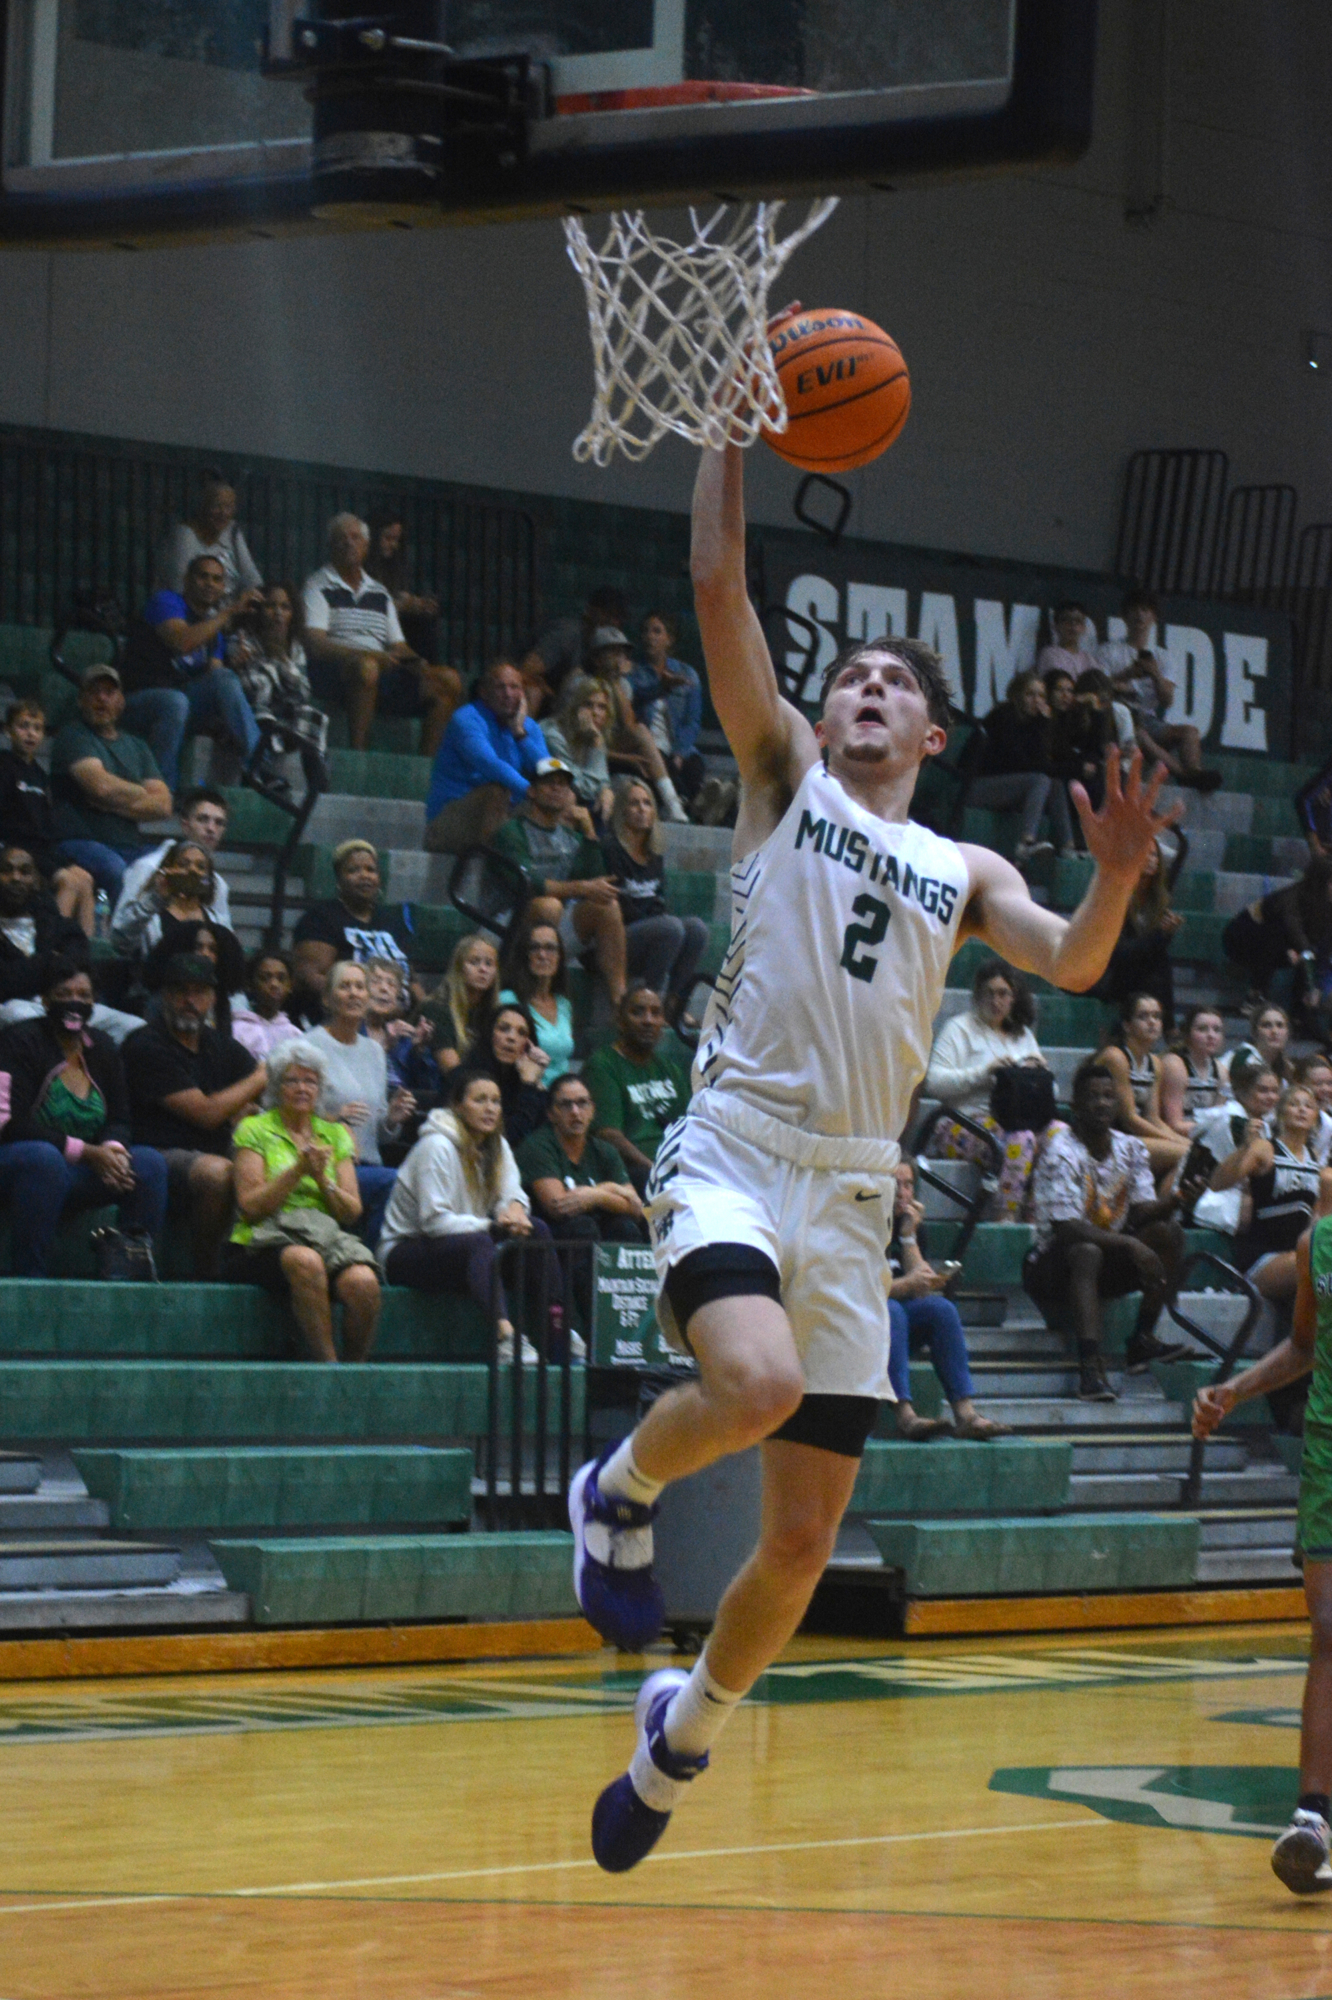 3. Andres Junge has turned into an all-around star for the Lakewood Ranch boys basketball team as a senior.